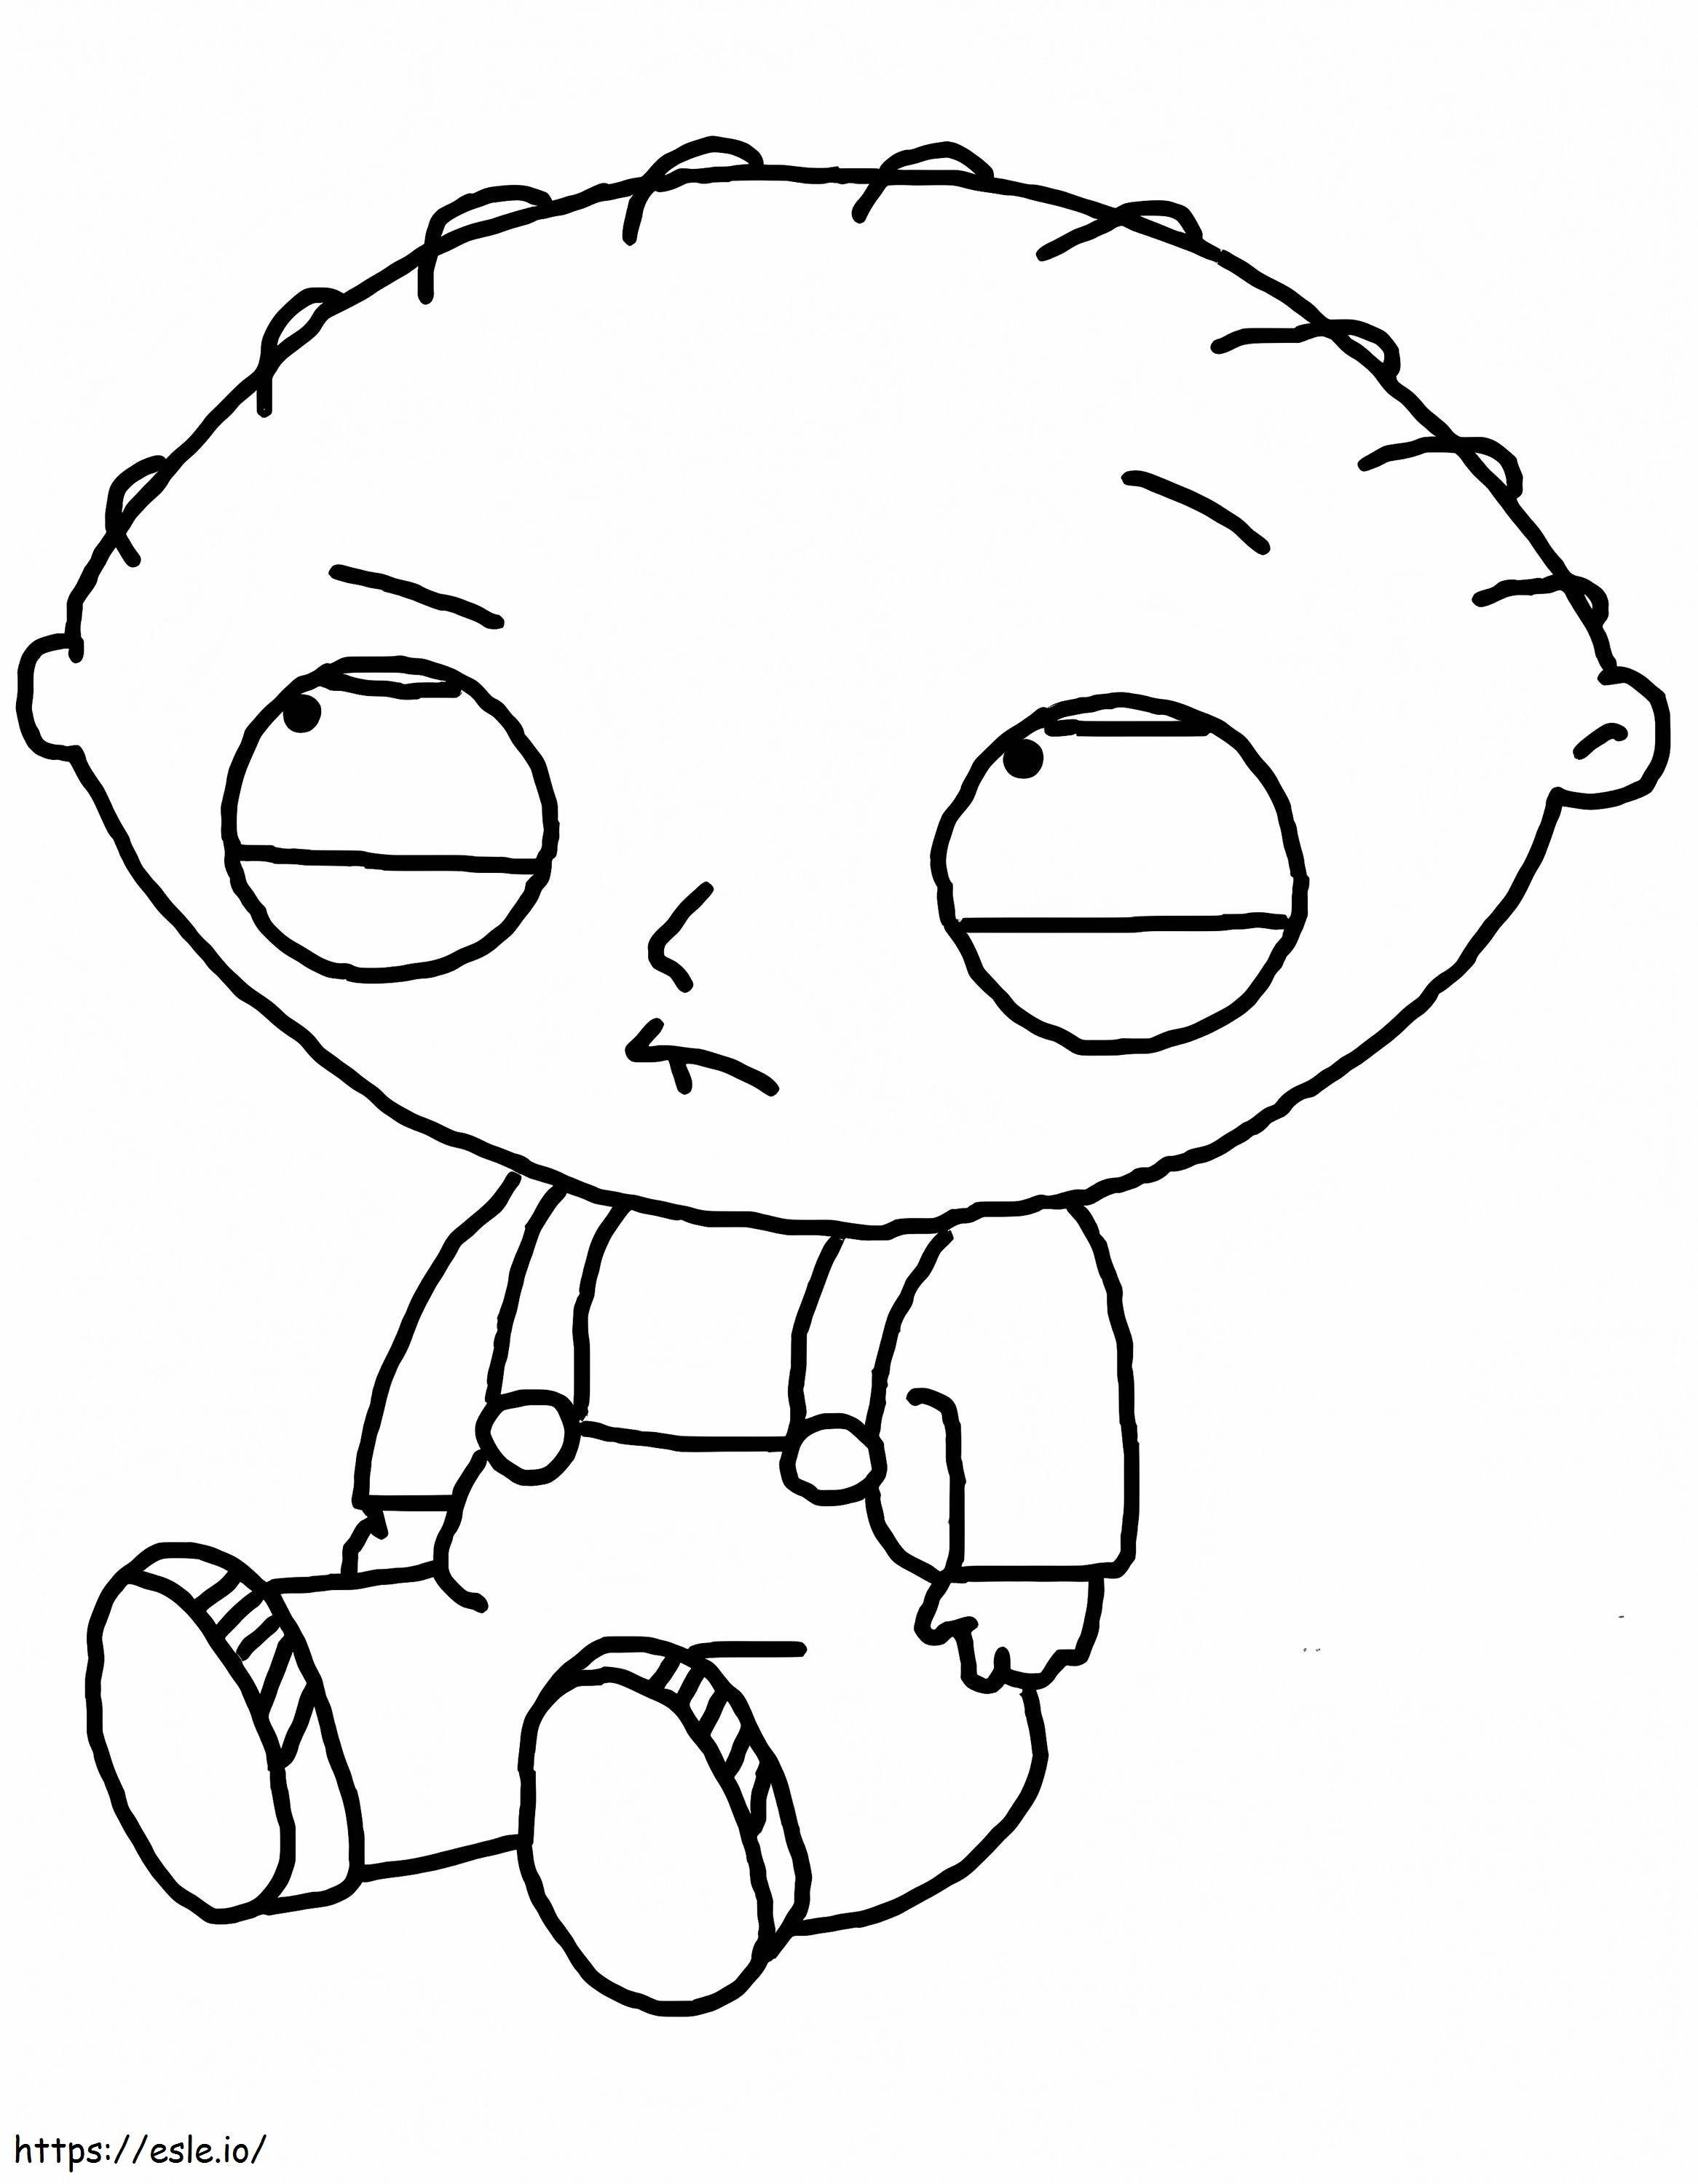 Stewie Griffin 4 coloring page